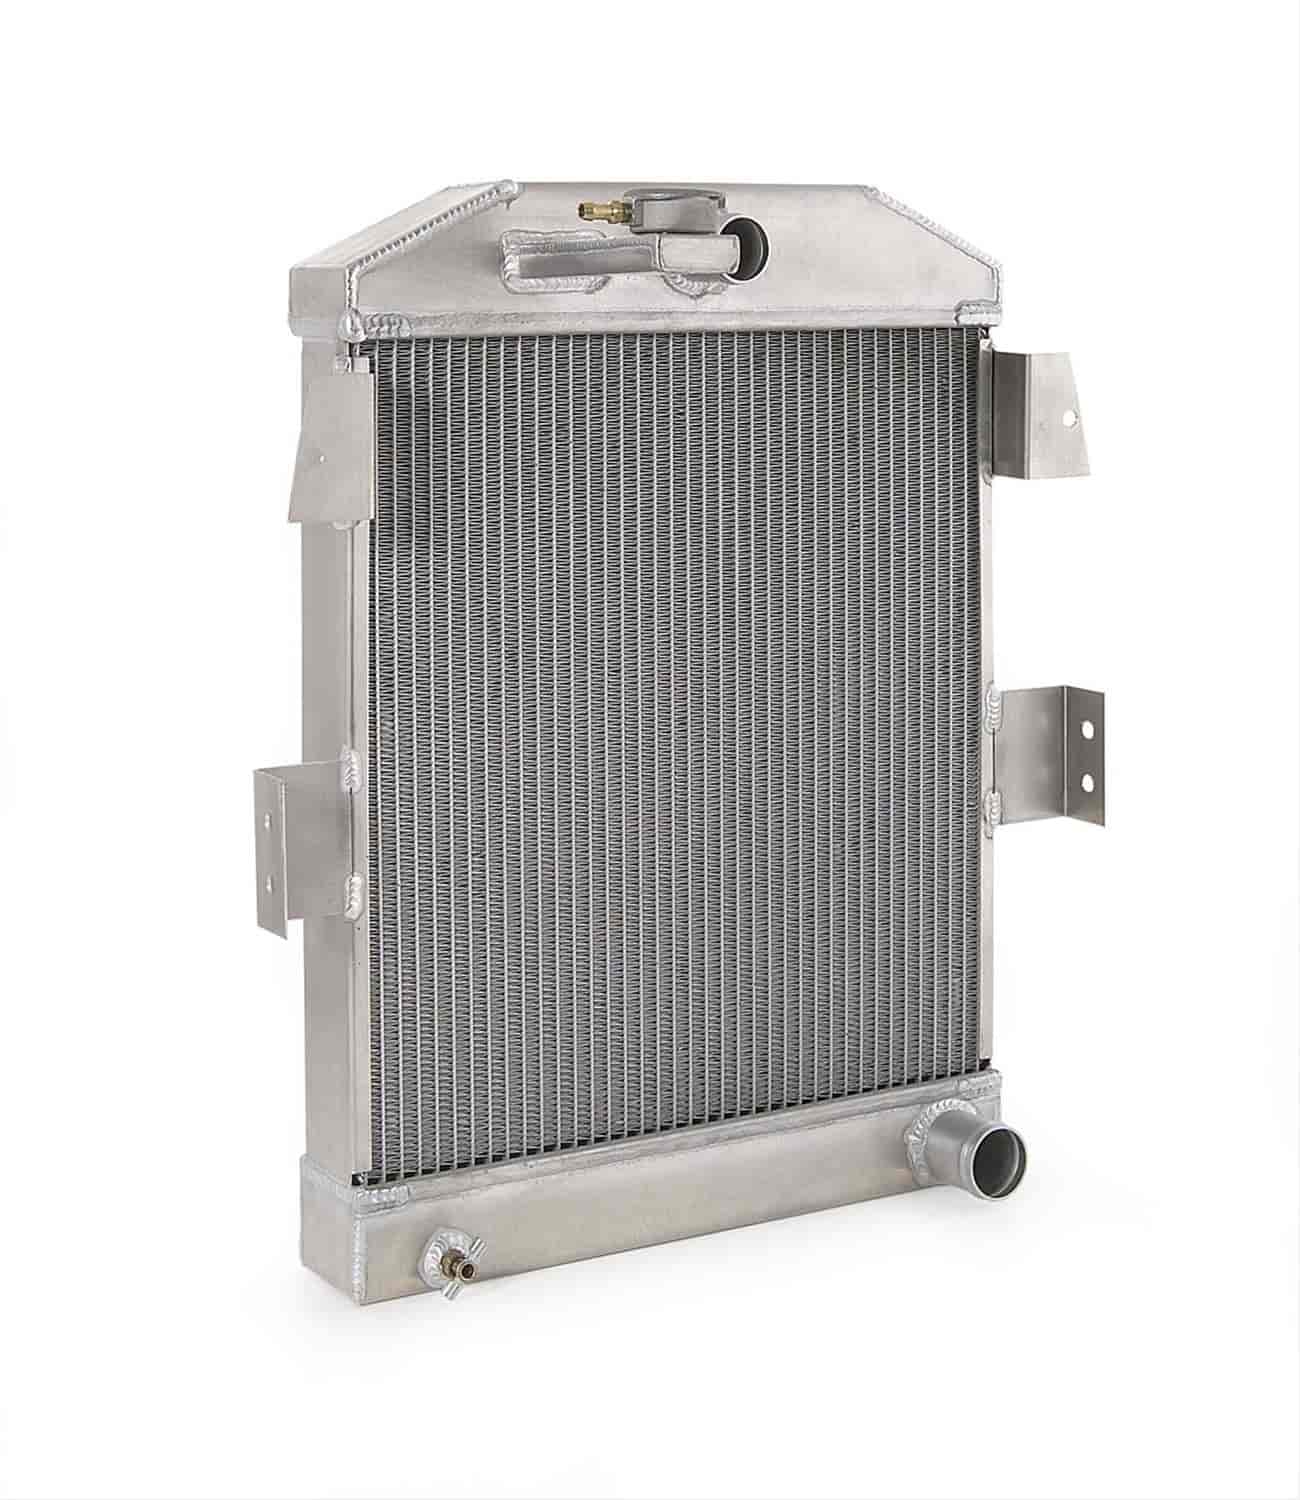 Aluminum Radiator 1934-1935 Chevy Car with Small Block Chevy